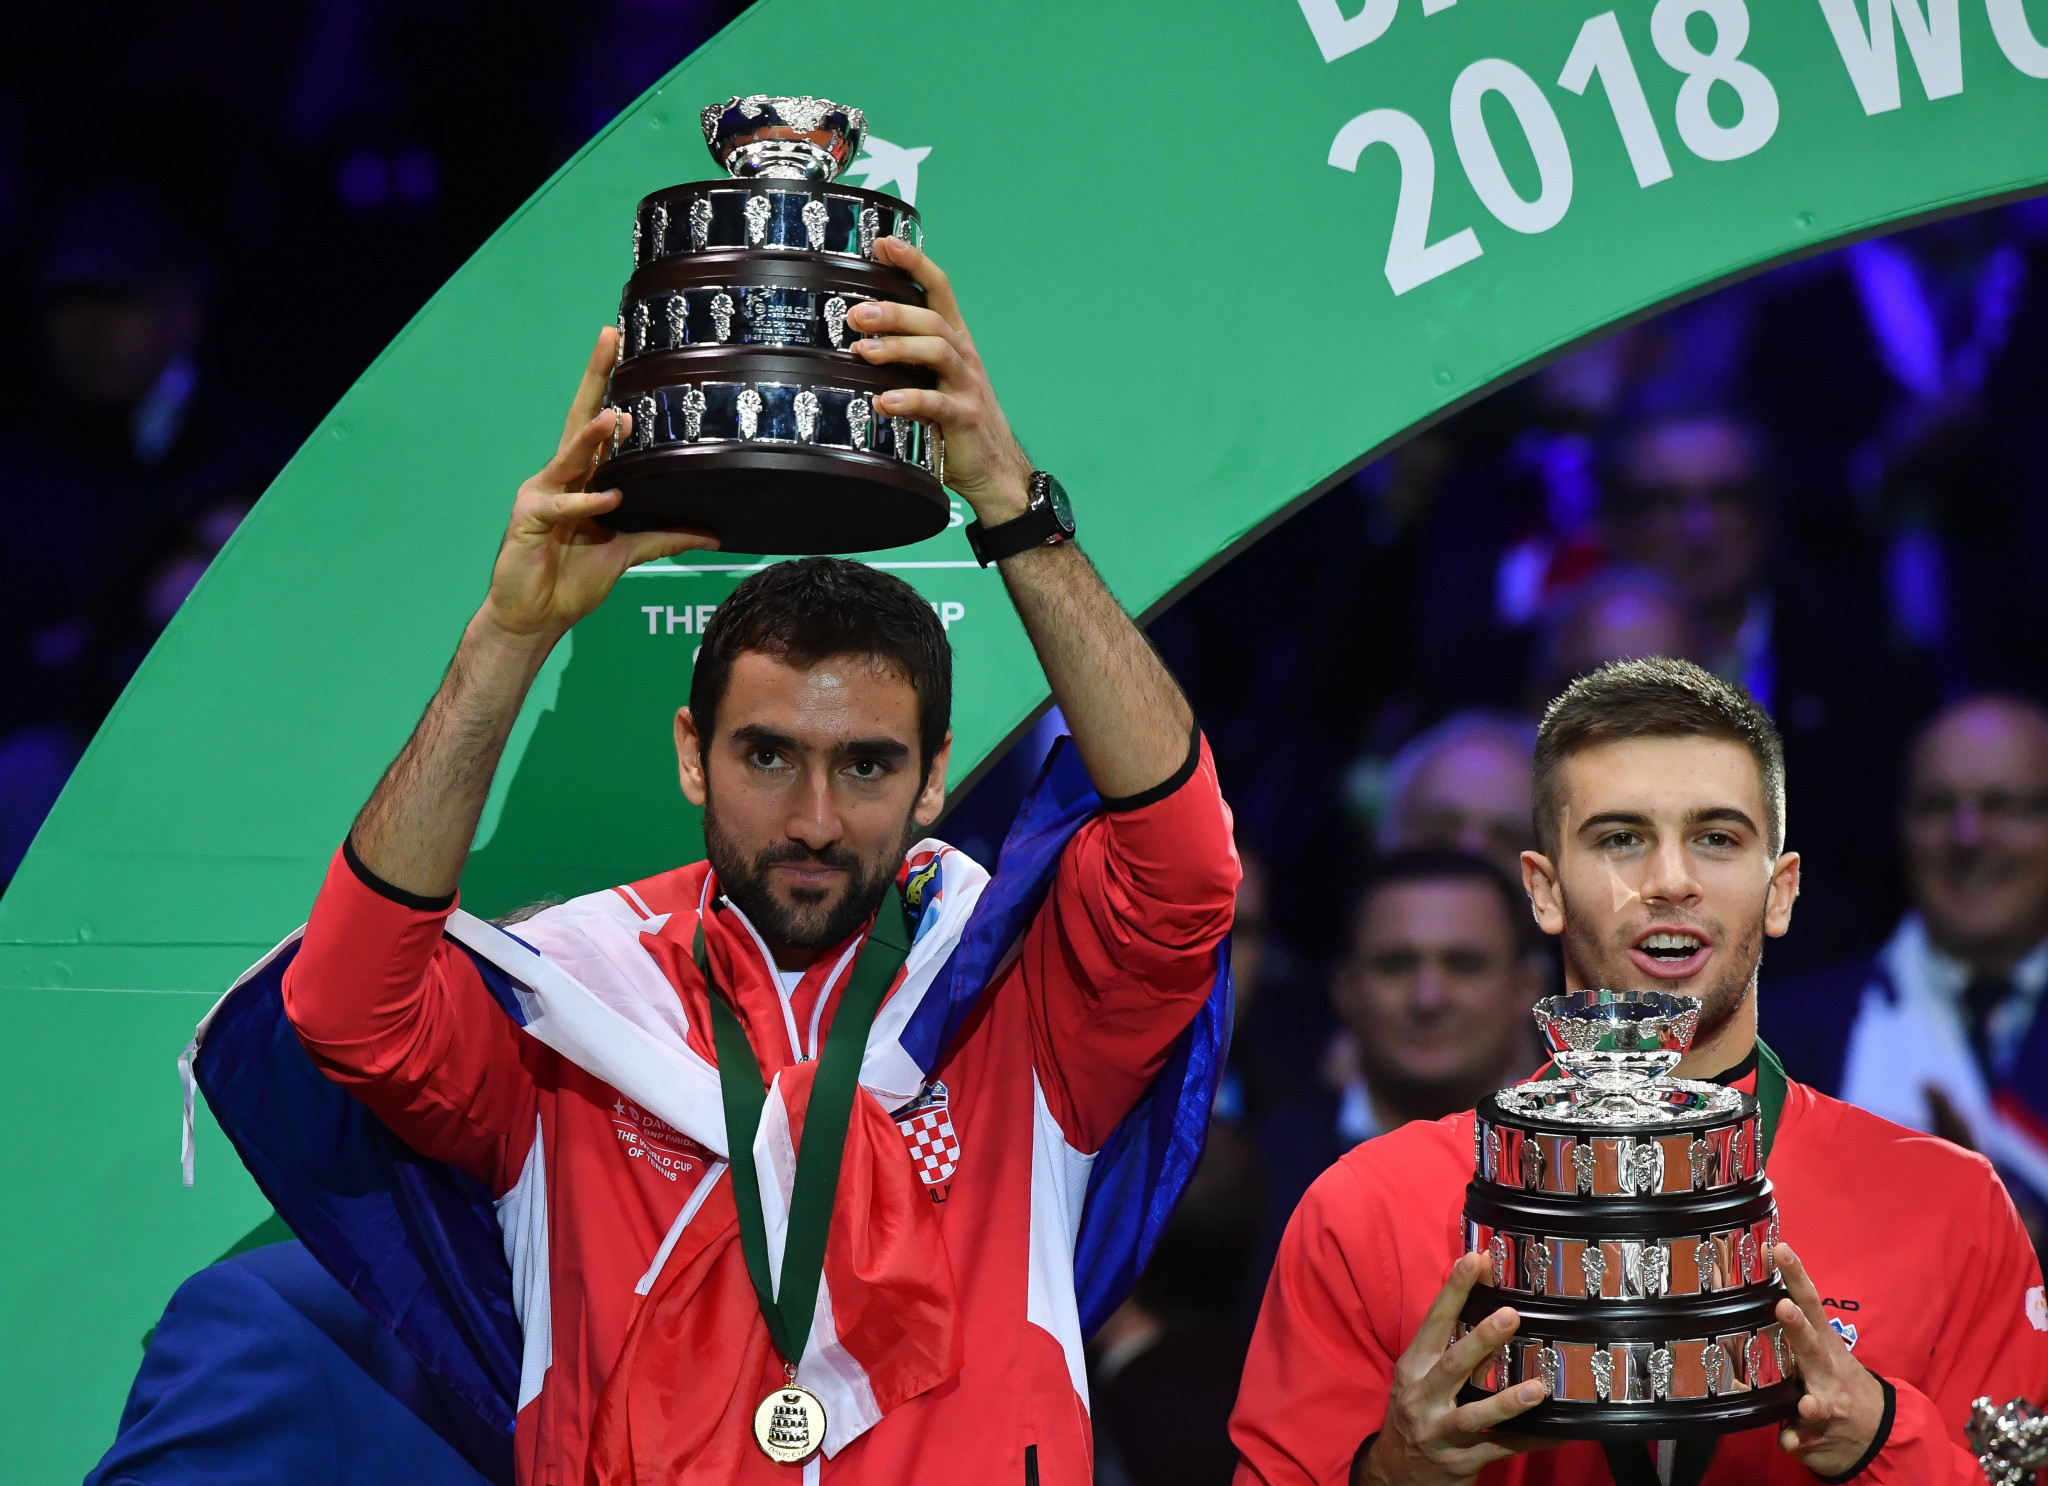 Defending champions Croatia will open the 2019 Davis Cup when they face Russia ©Getty Images